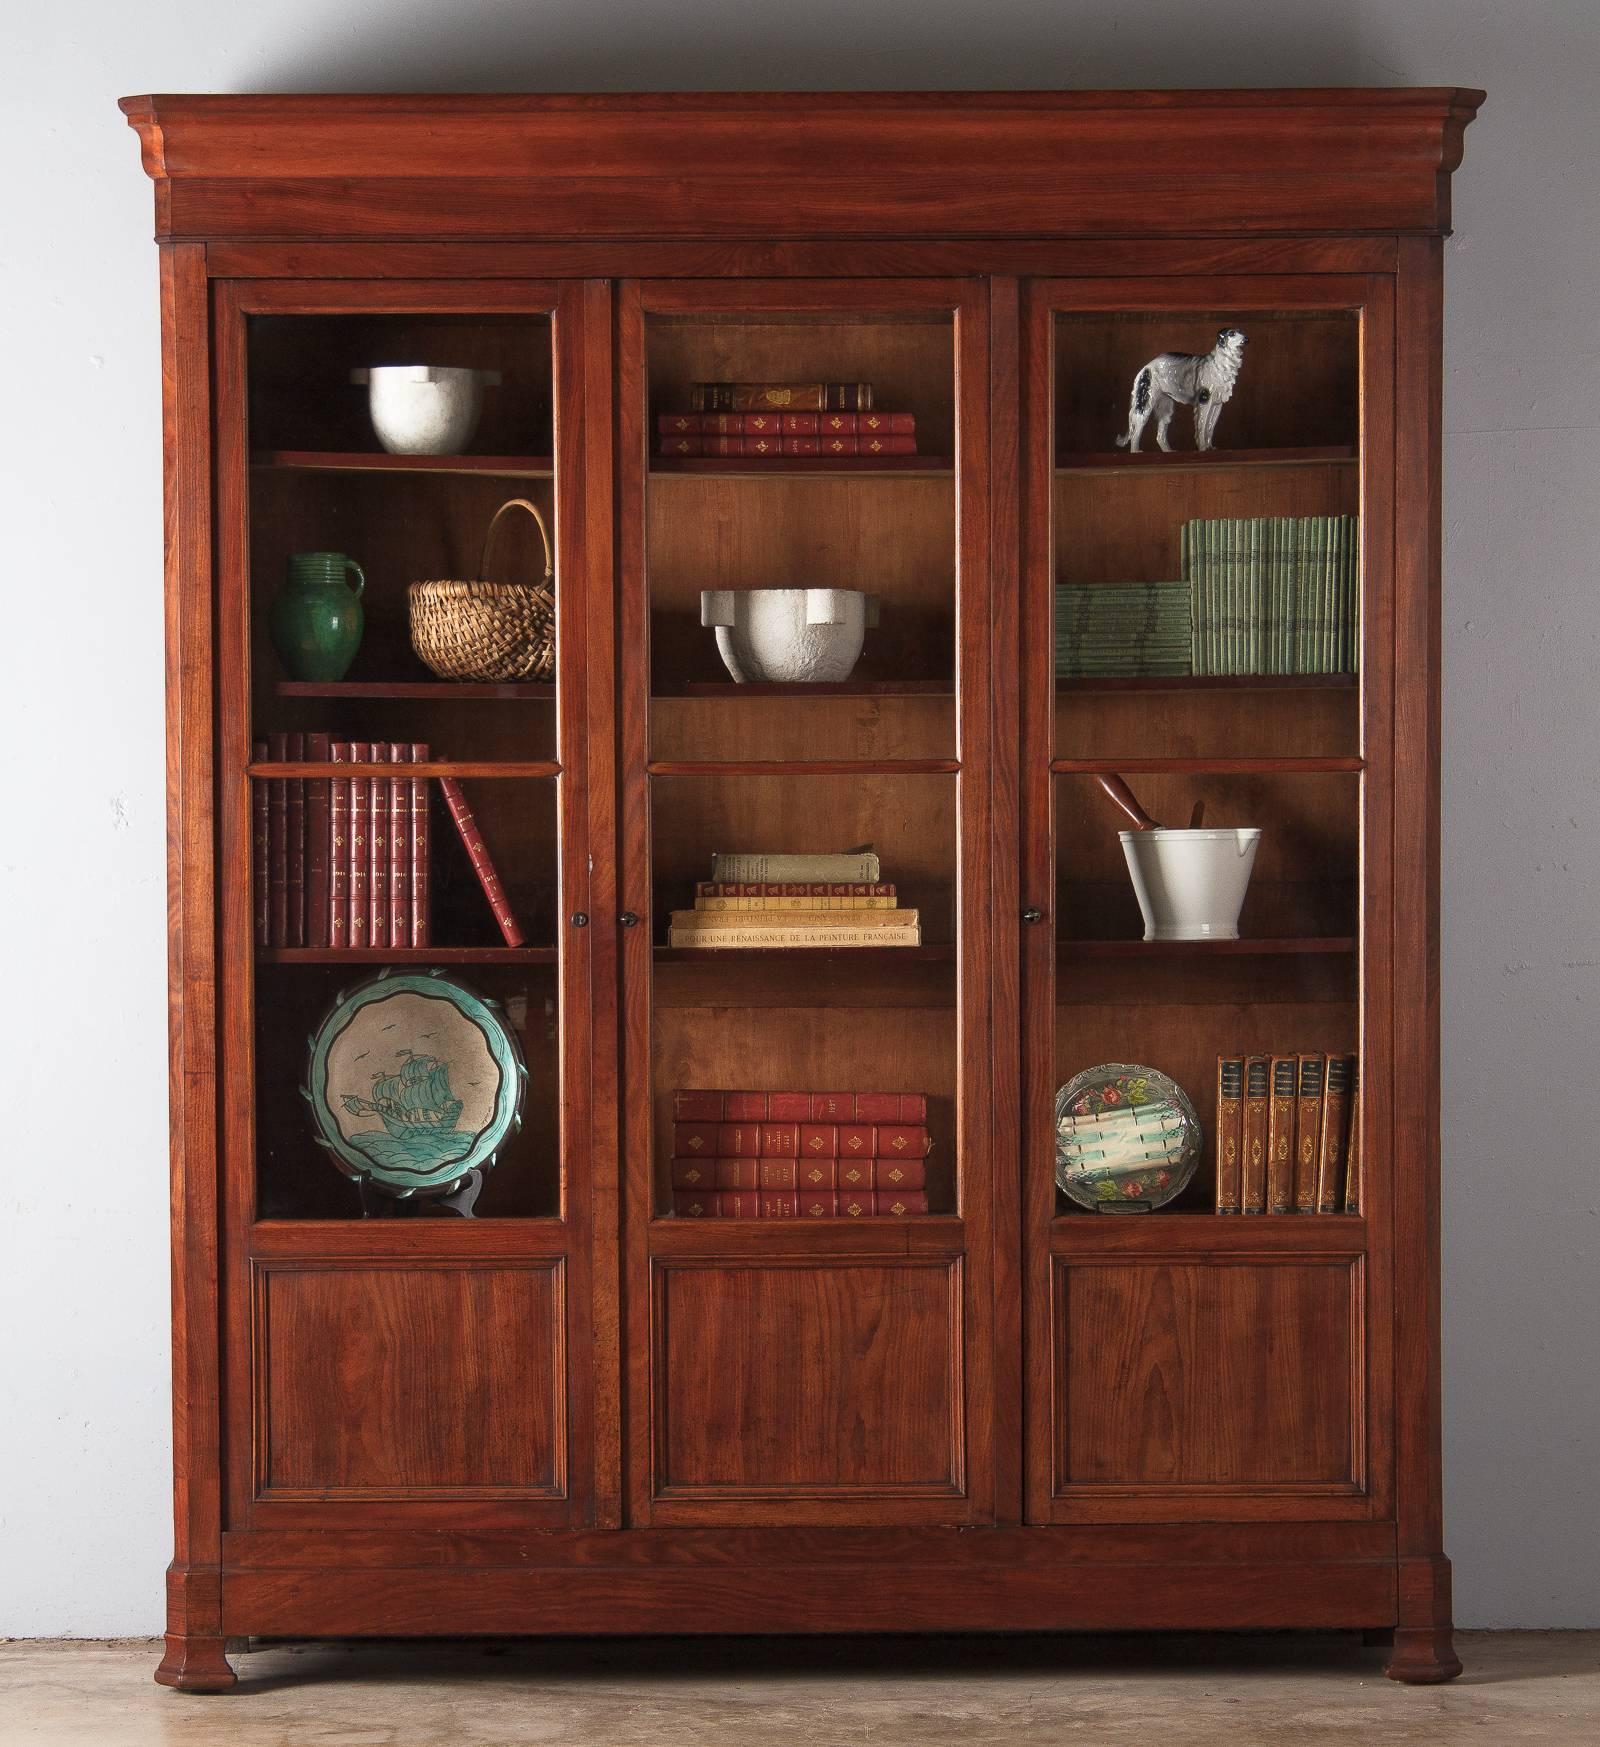 A wonderful Louis Philippe period three-door bookcase from Lyon, France, circa 1830s. The bookcase is made of solid walnut and walnut veneer. The paneled doors have their original glass. The inside is 14